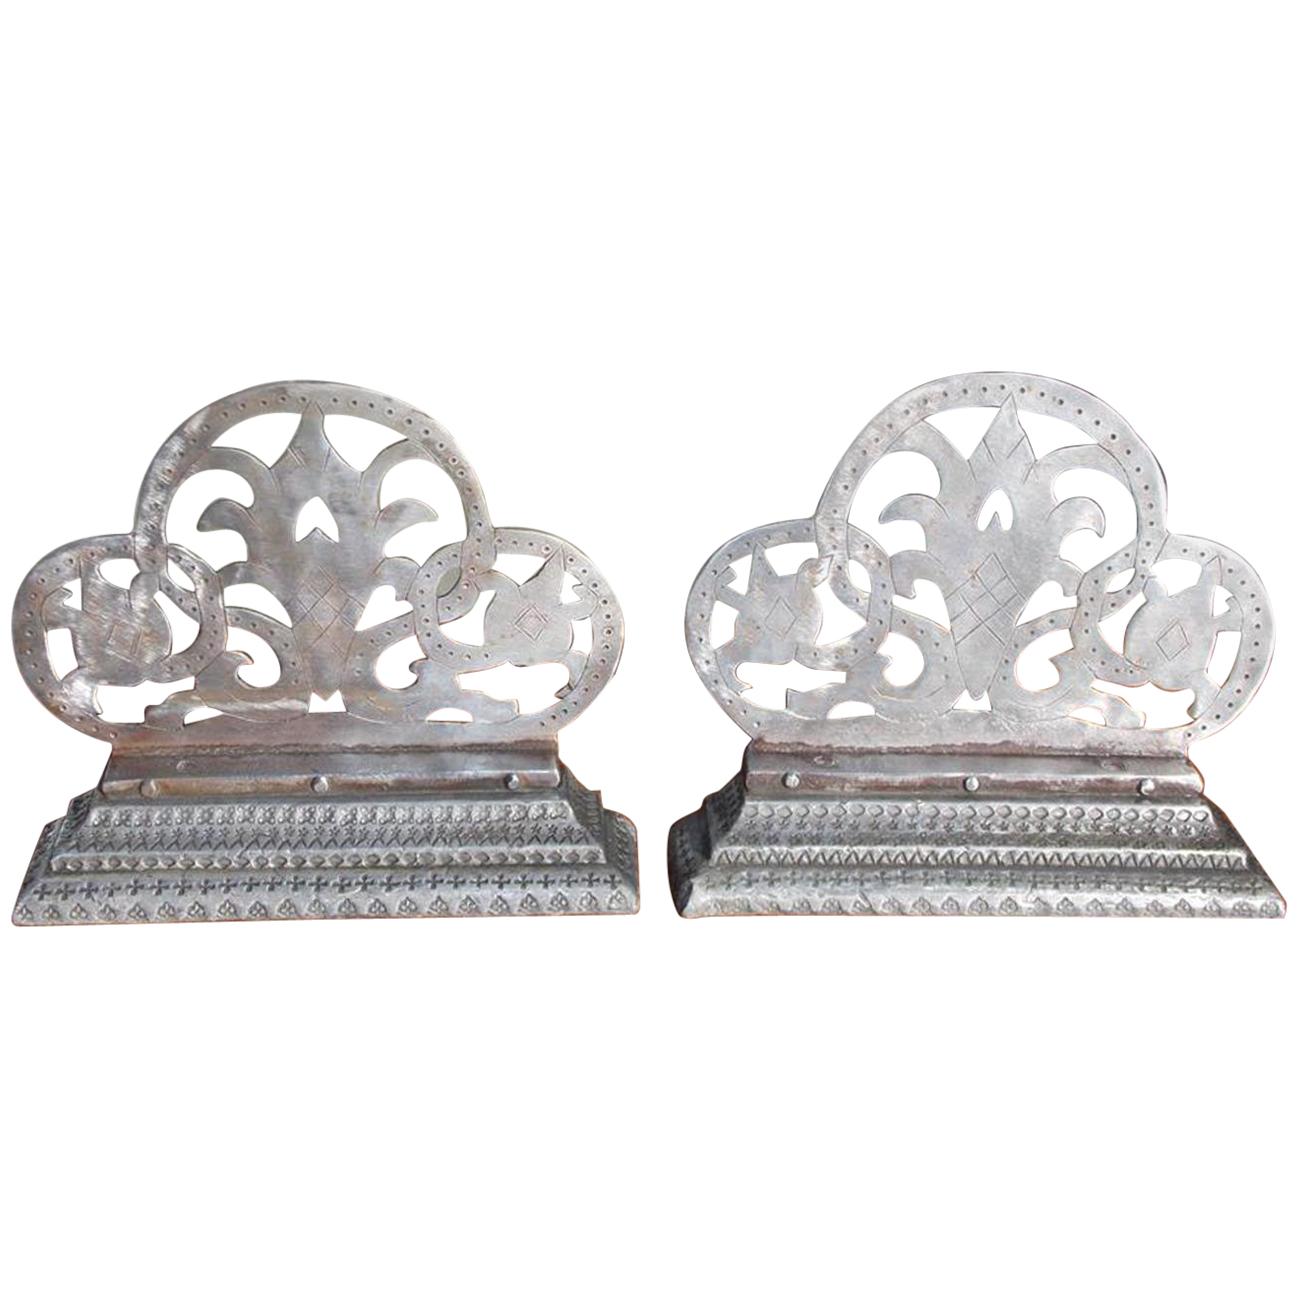 Pair of English Polished Steel Hand Chase Decorative Floral Bookends, Circa 1830 For Sale